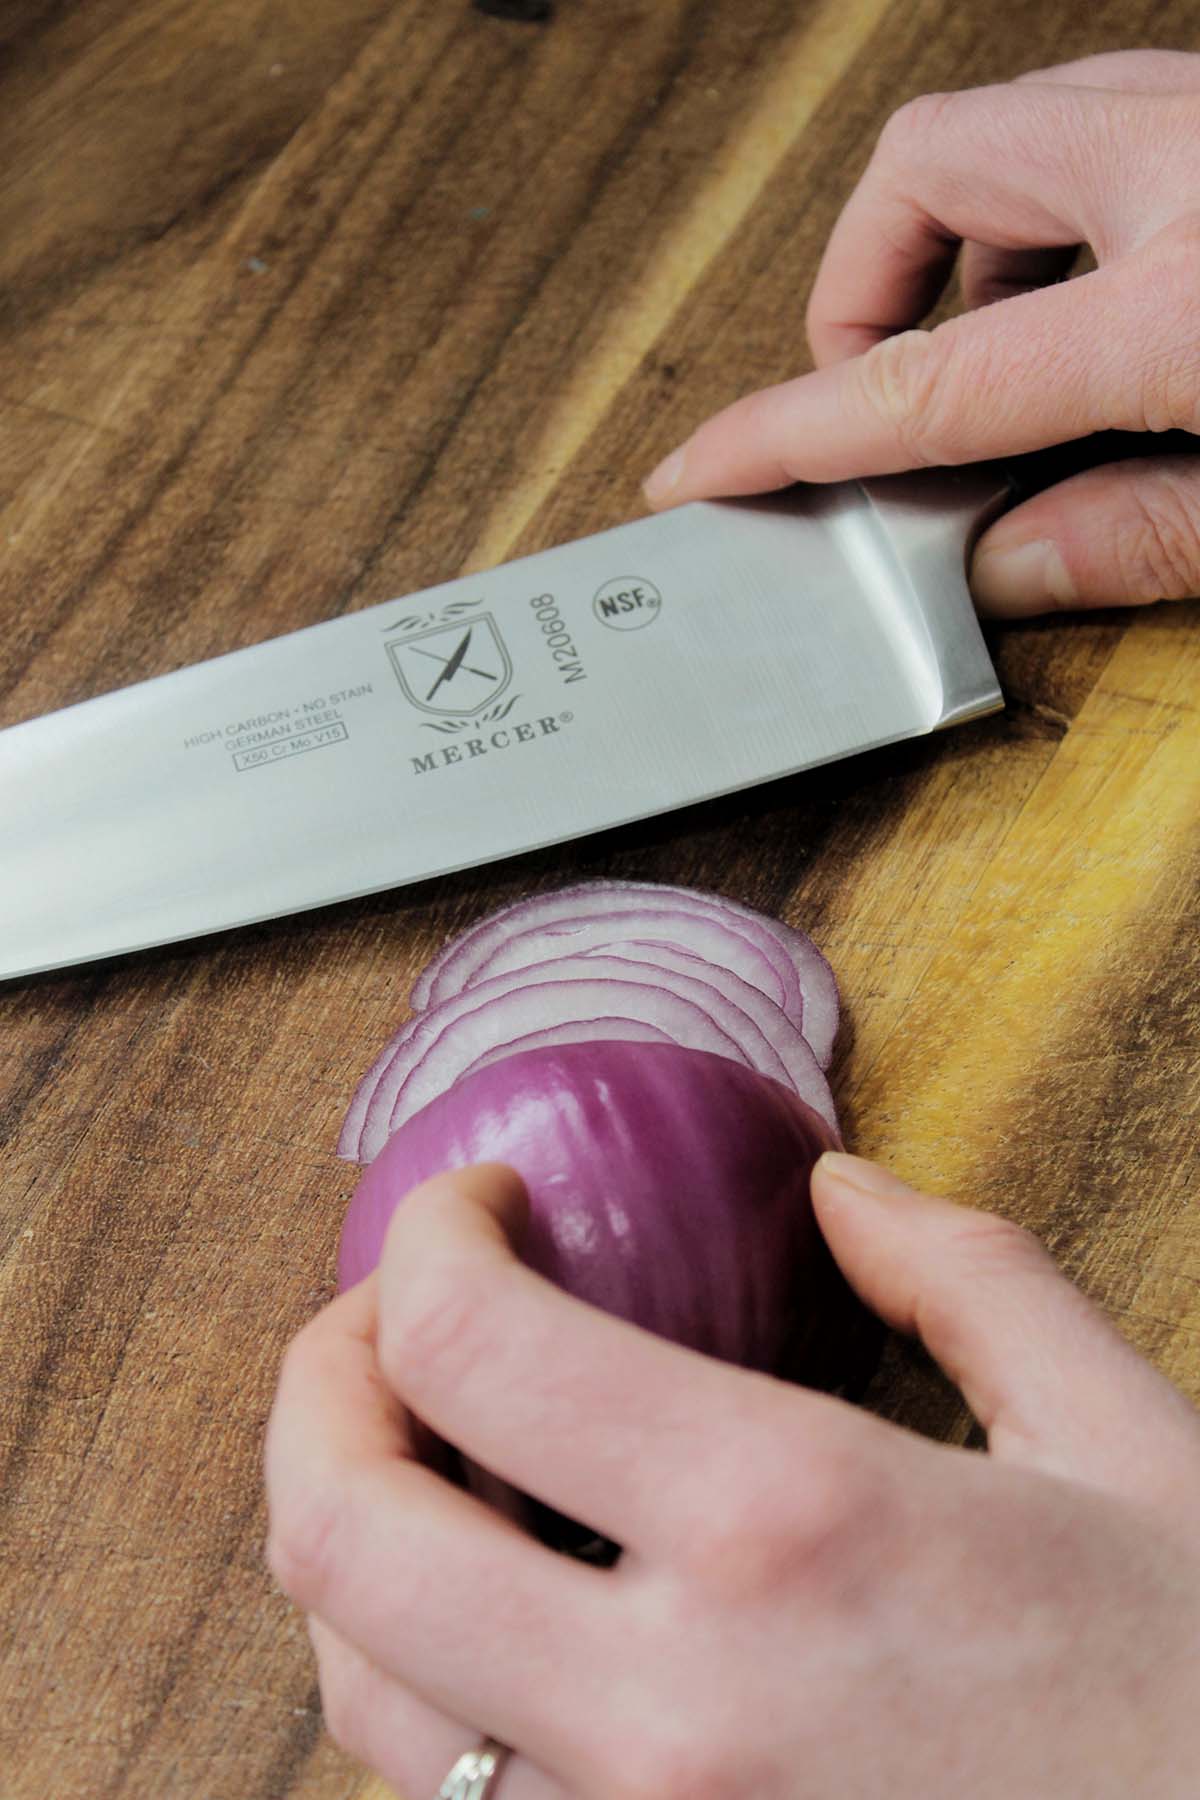 chef's knife next to onion slices.